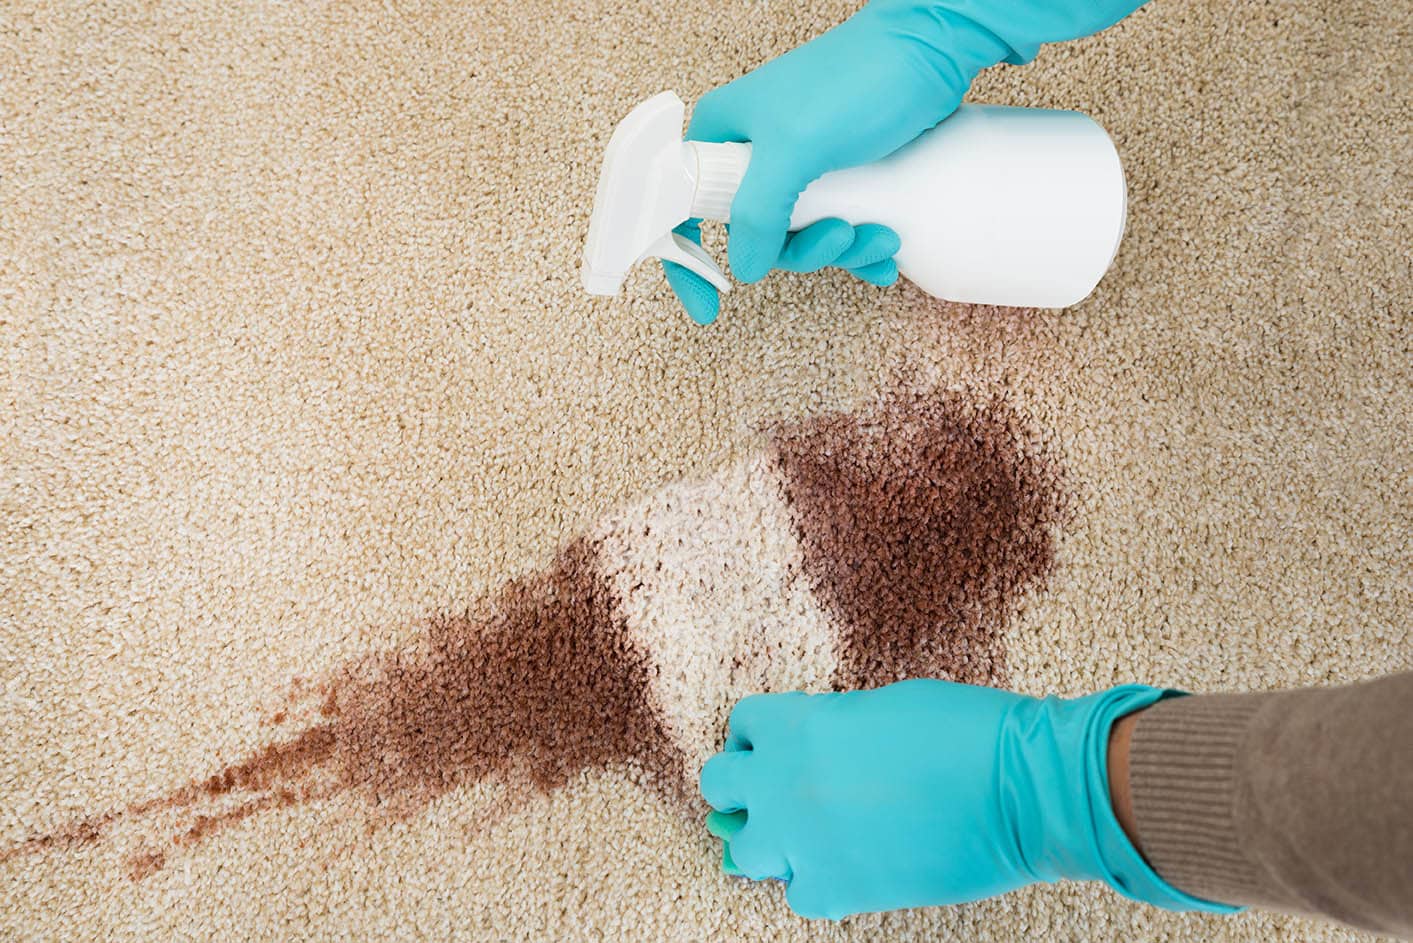 How To Get Rid Of Dog Diarrhea On A Carpet